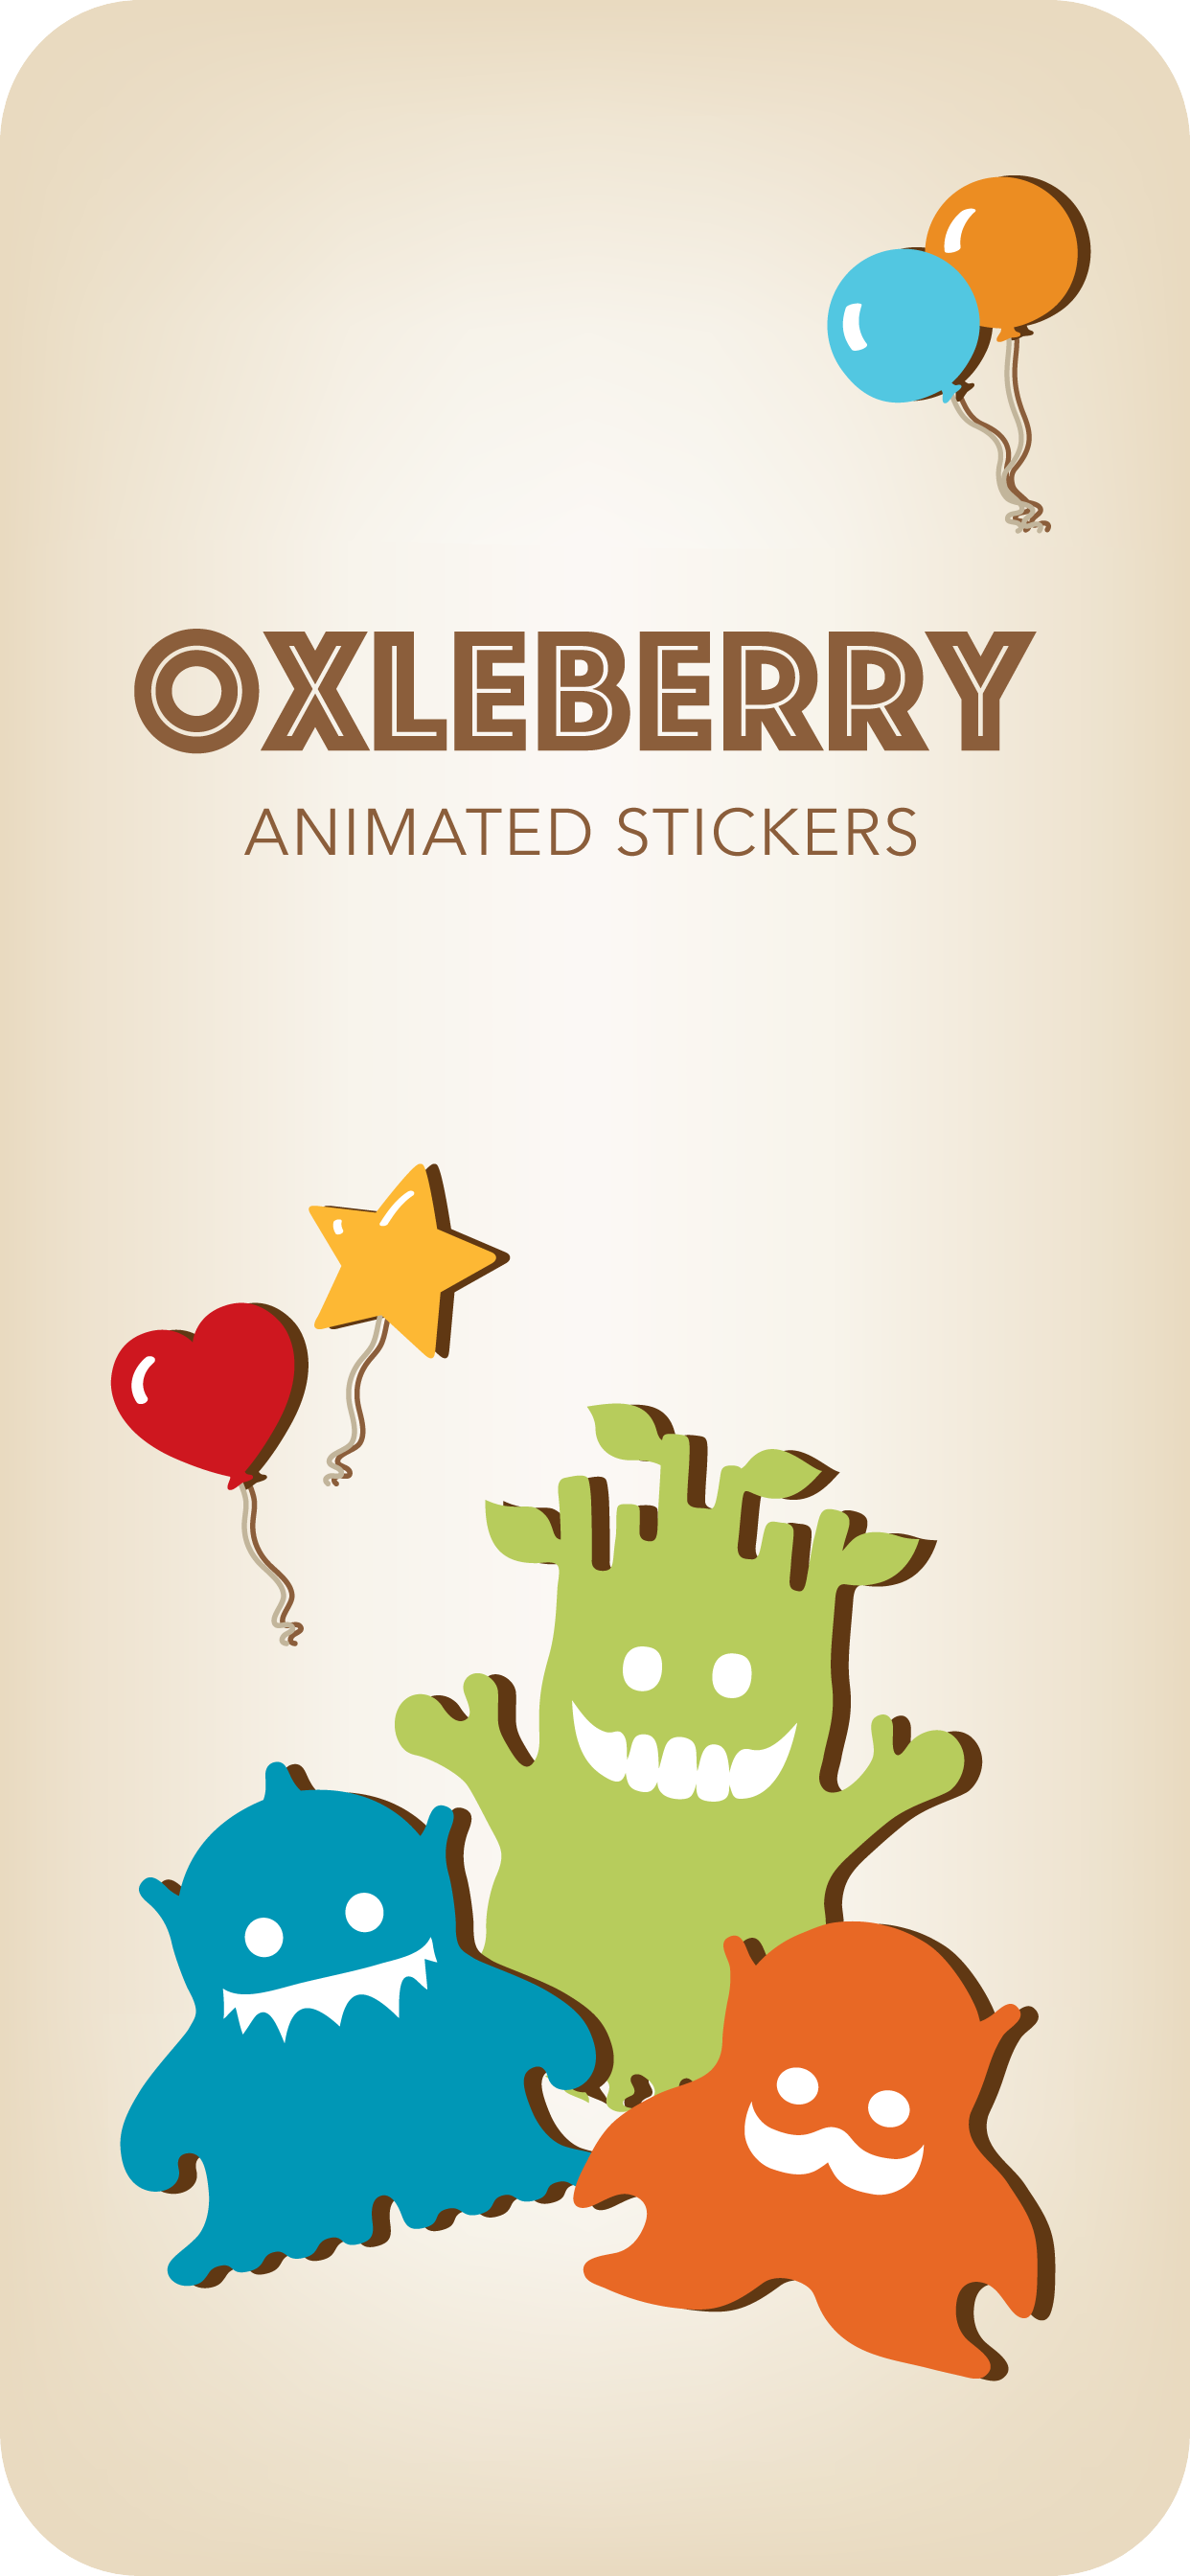 App cover - Oxleberry Animated Stickers